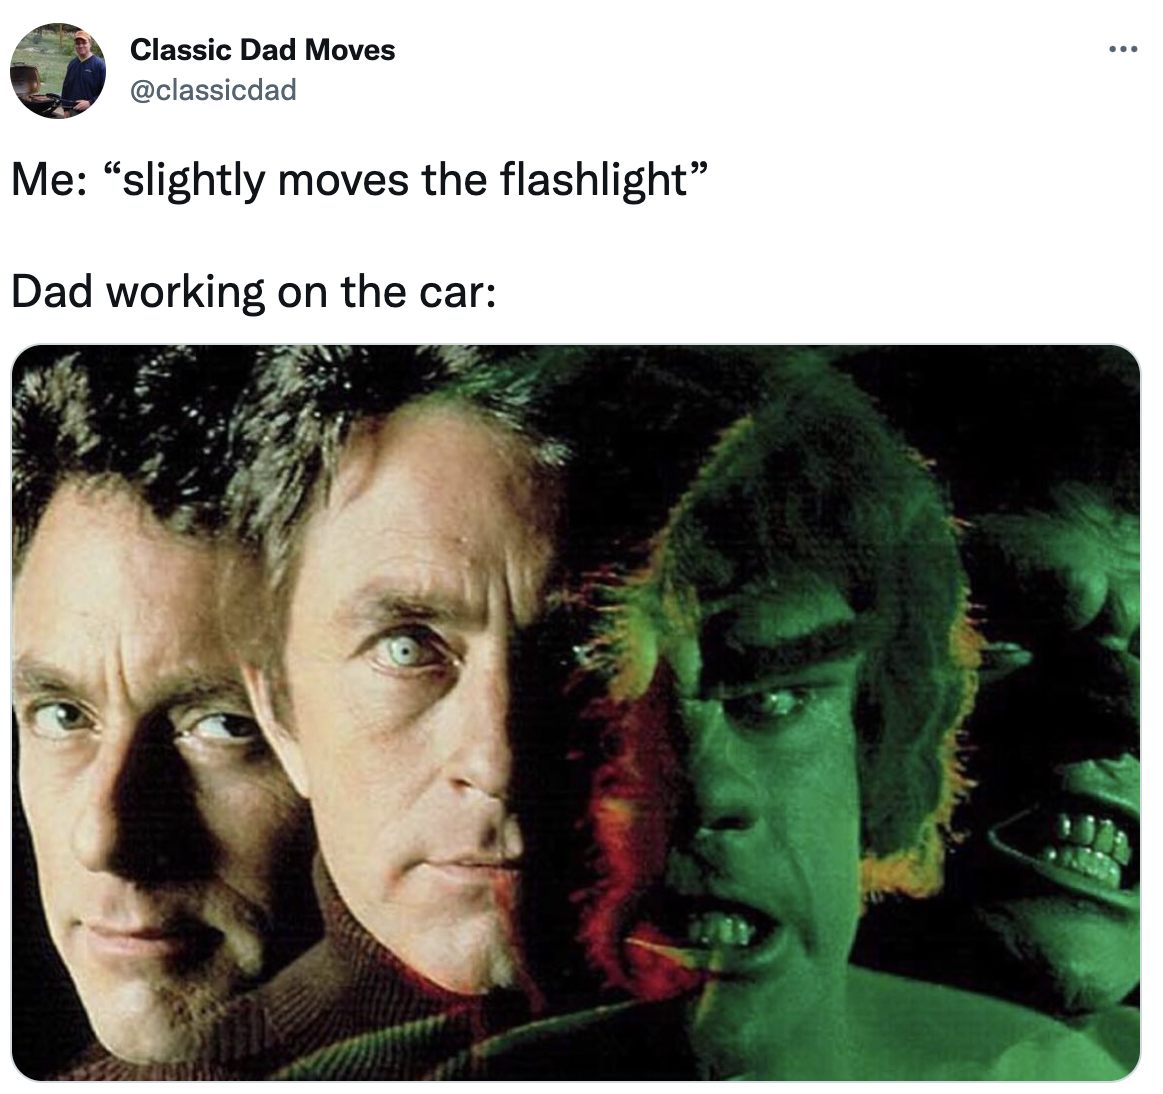 Dank Dad Memes - incredible hulk bill bixby - Classic Dad Moves Me "slightly moves the flashlight" Dad working on the car www